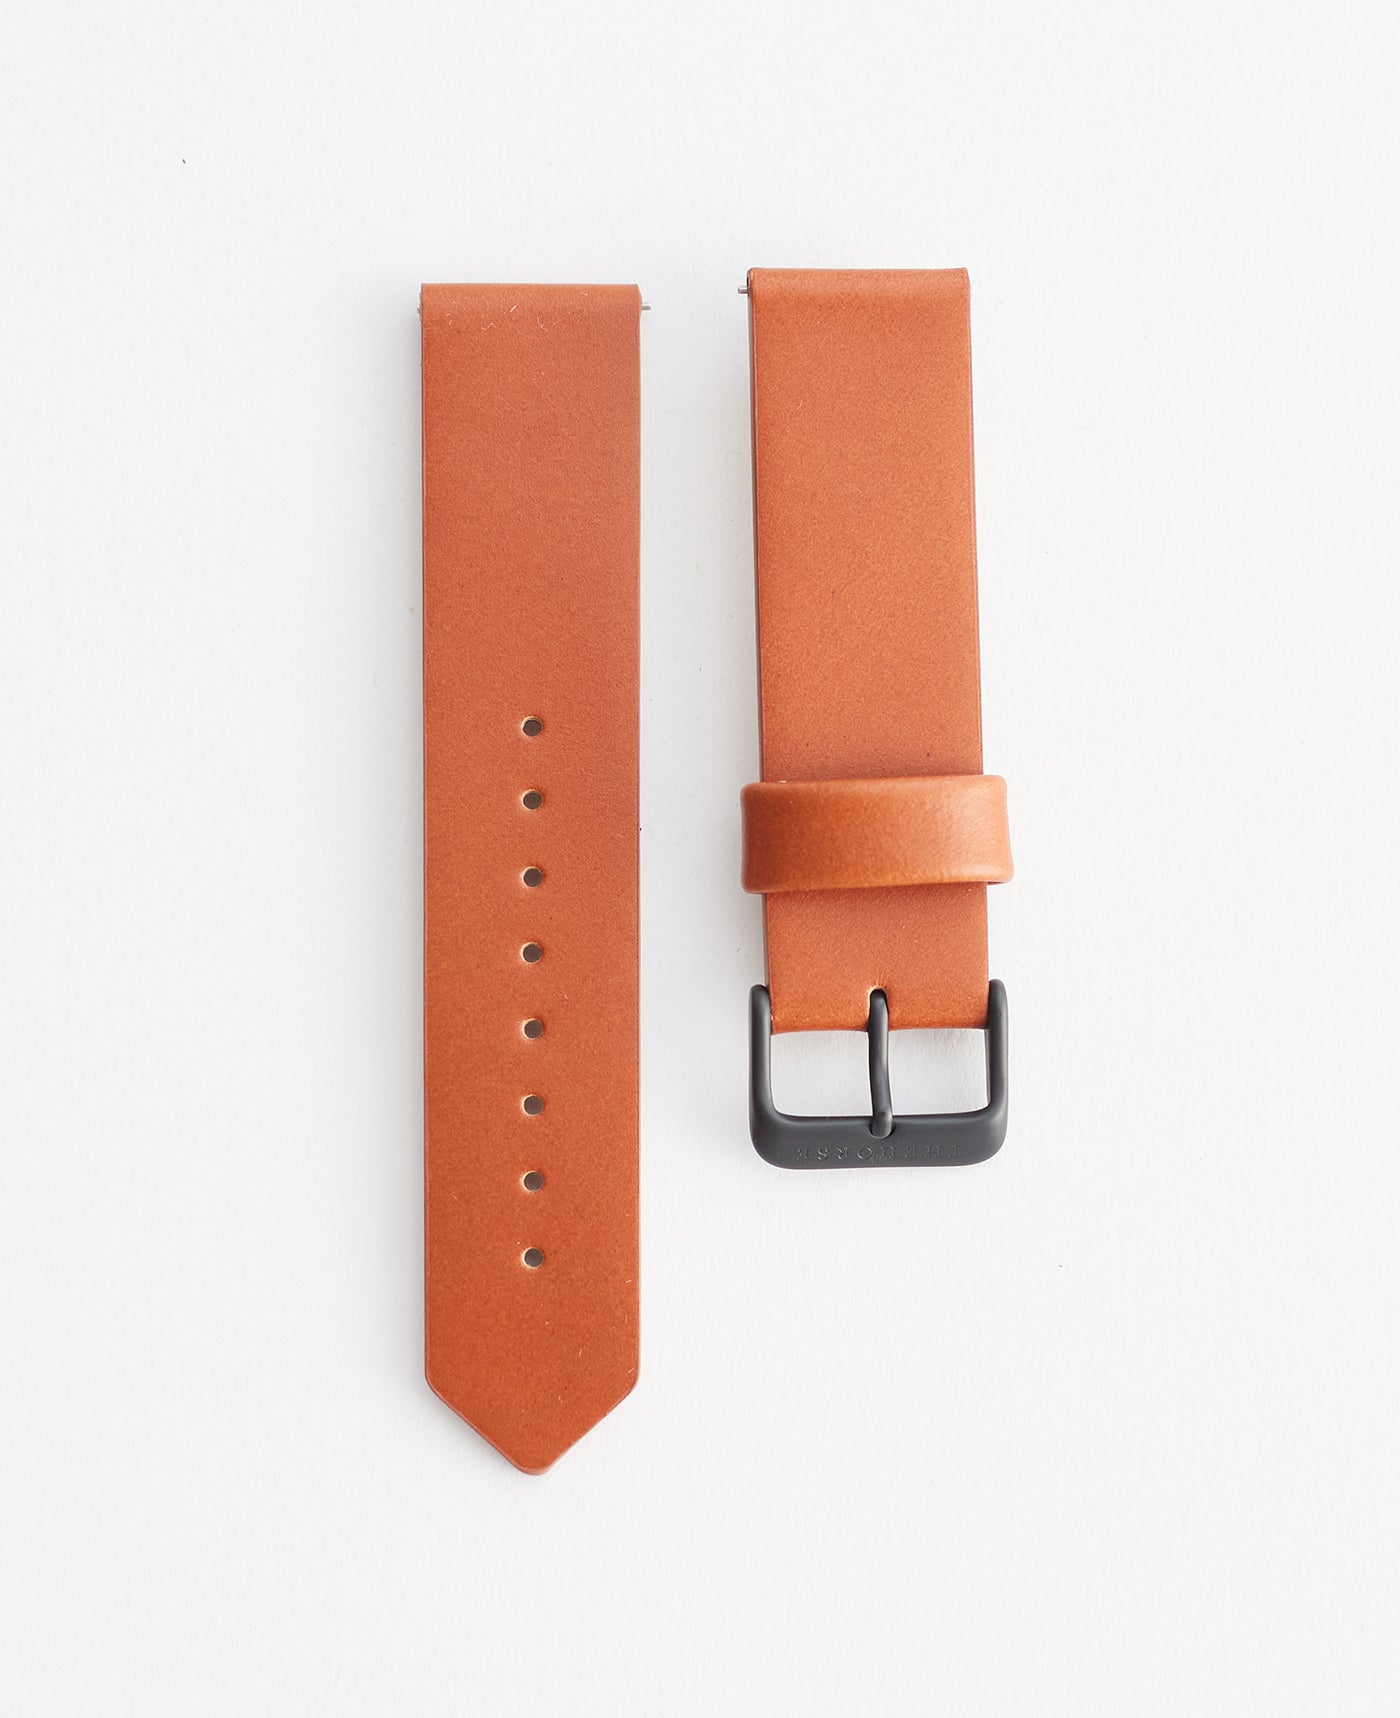 The Mini Original Strap - 18mm - Tan Band / Black Buckle by The Horse®